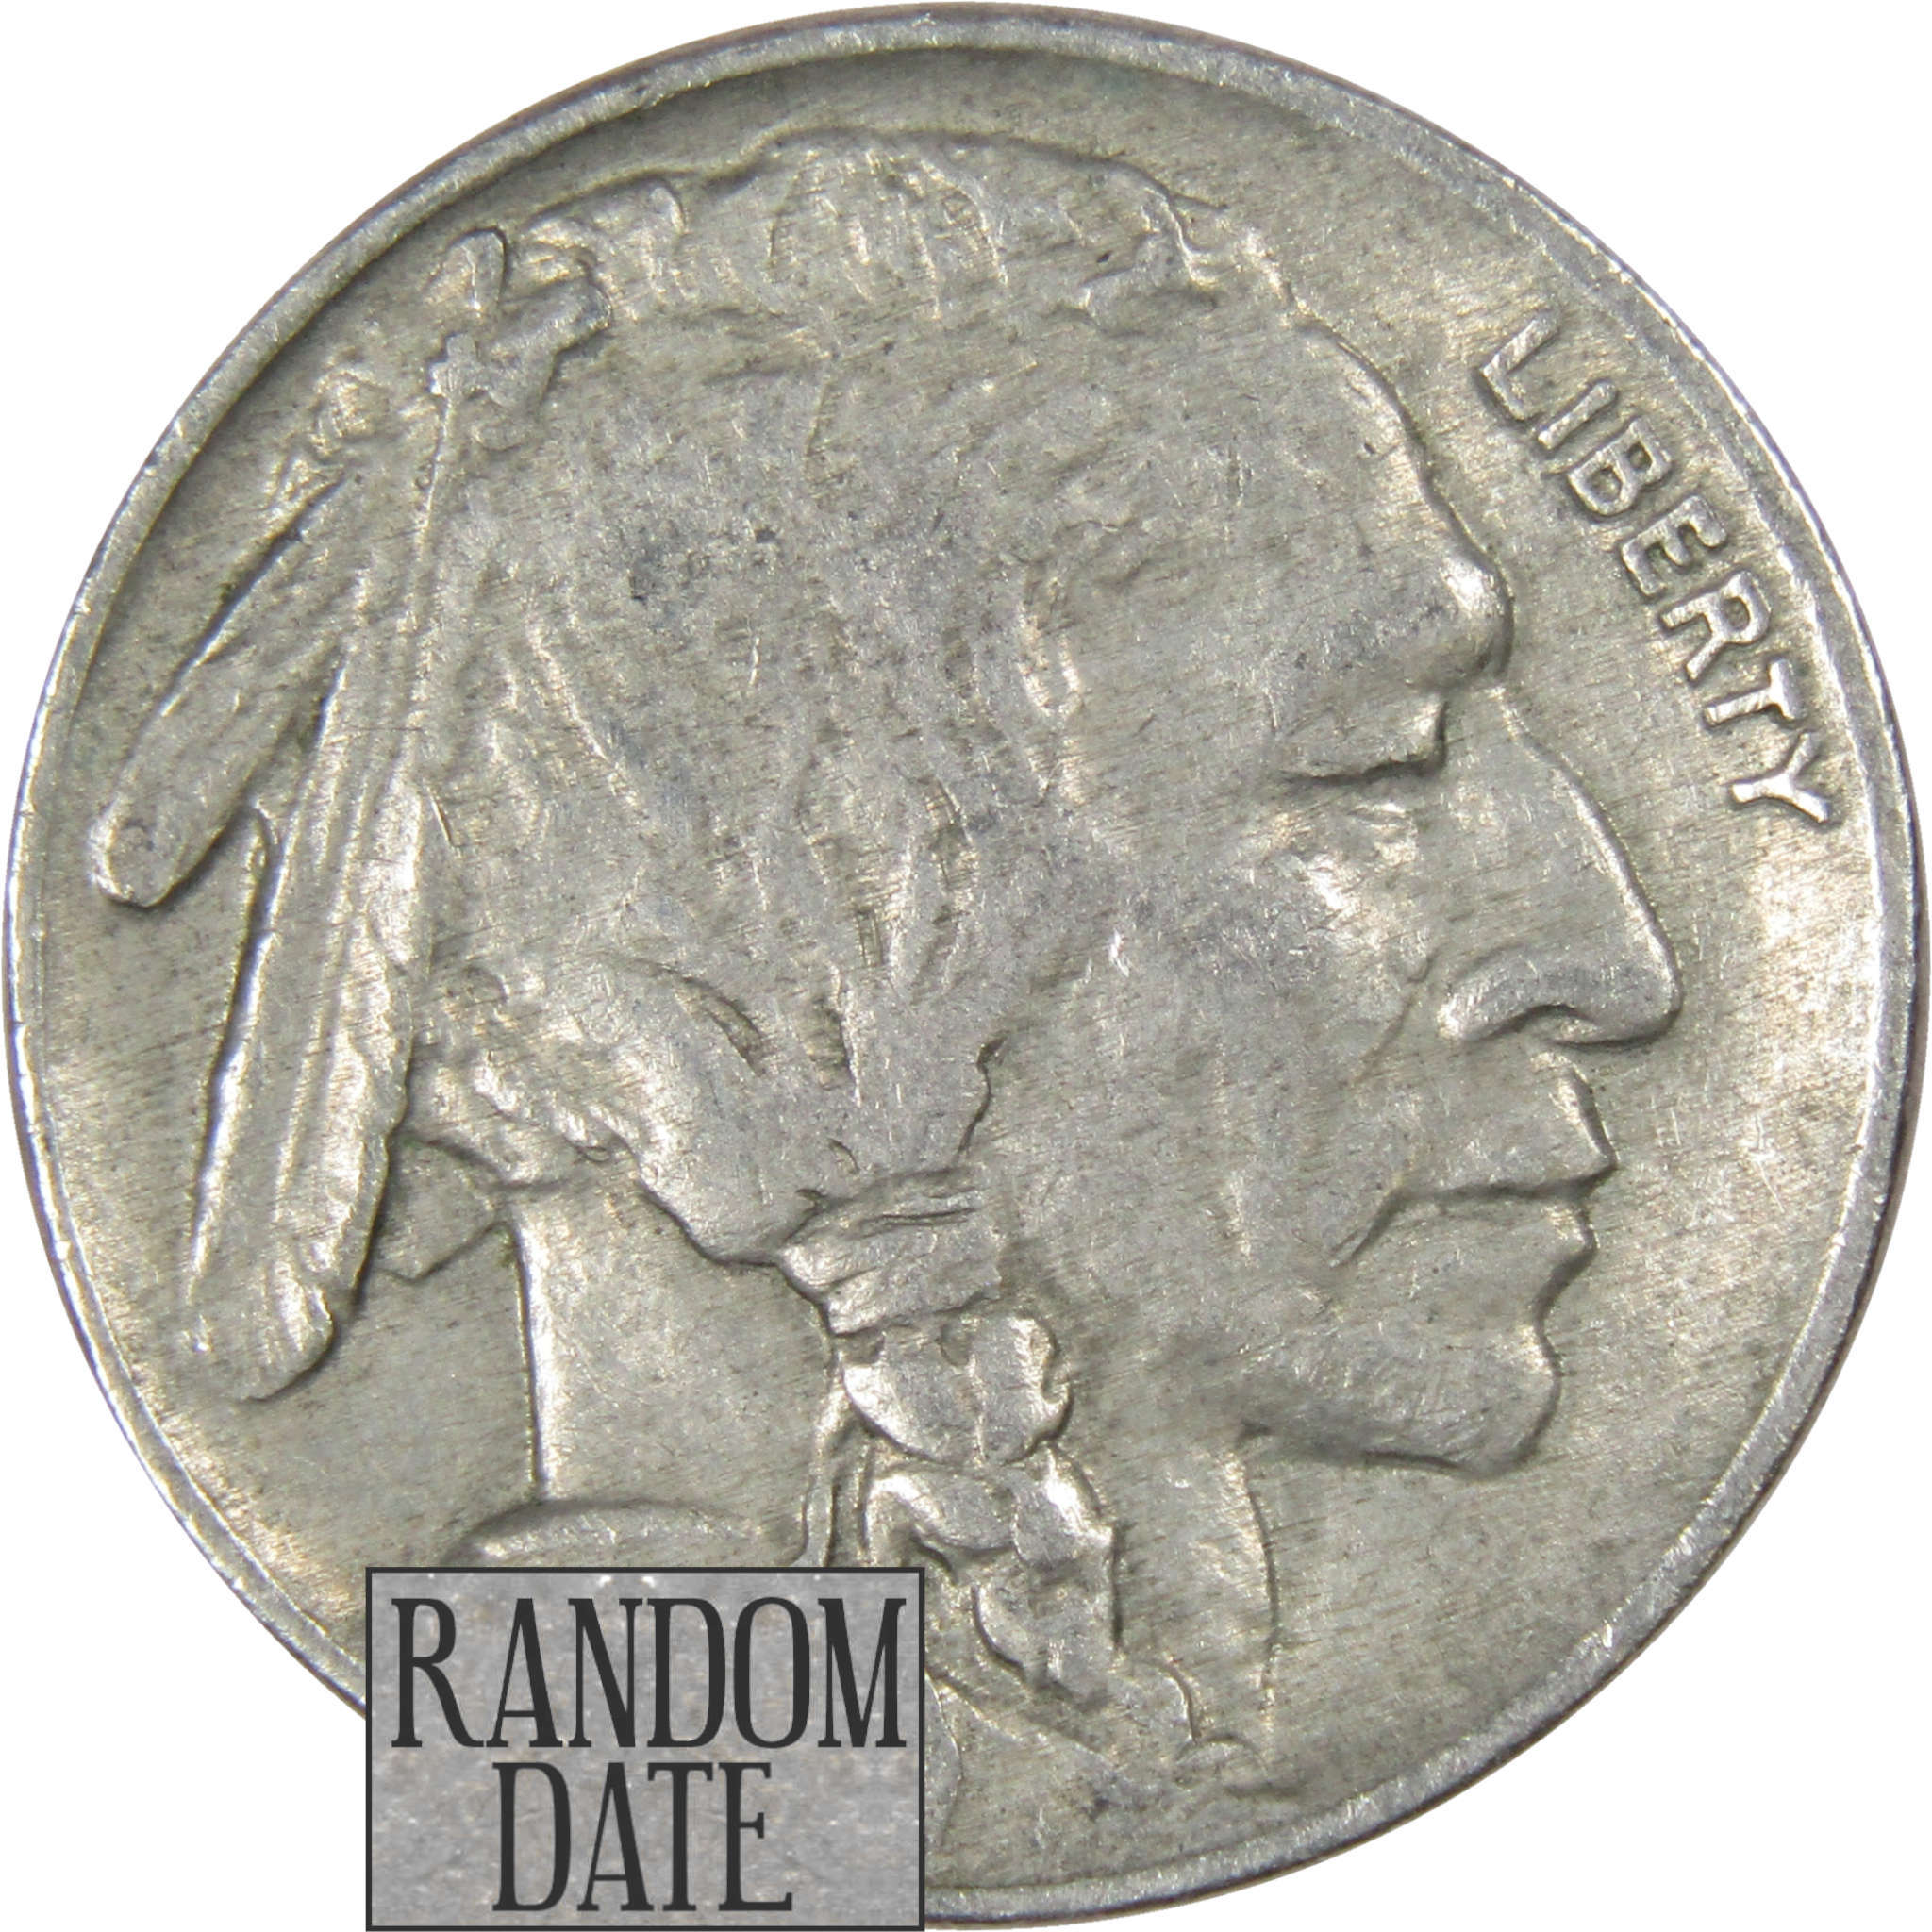 Indian Head Buffalo Nickel 5 Cent Piece XF EF Extremely Fine Random Date 5c Coin